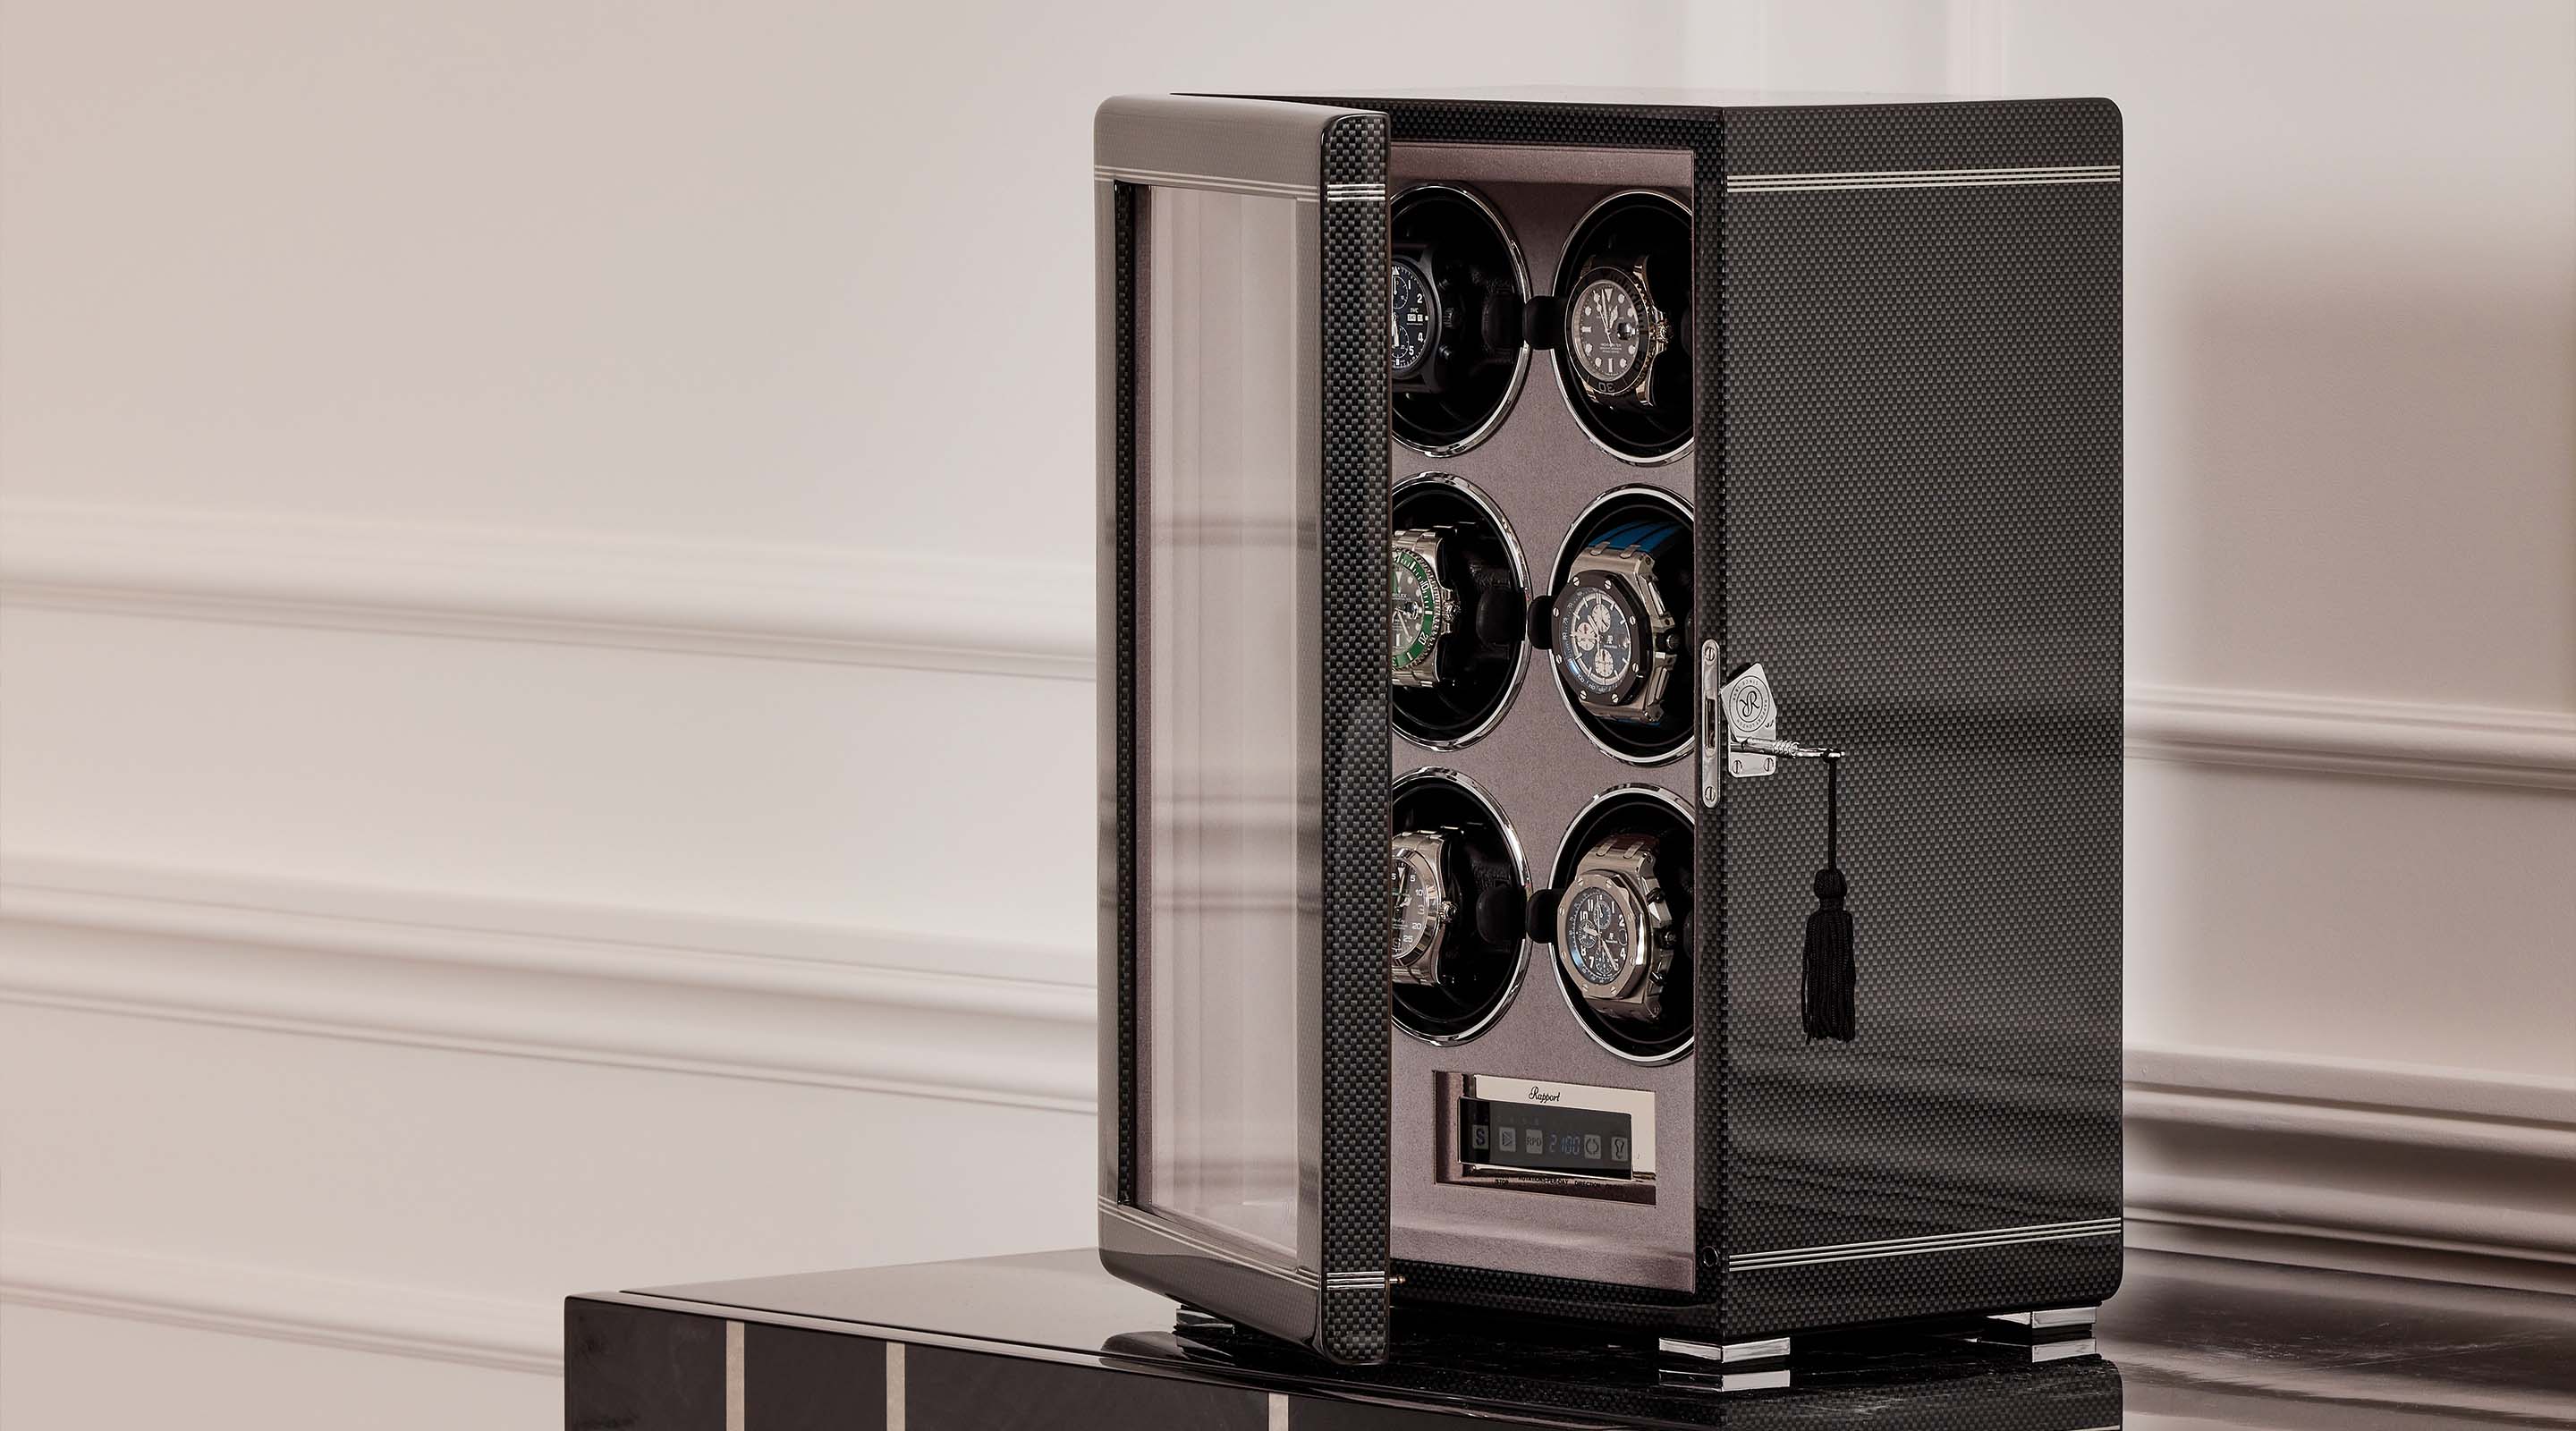 Article: Do you Need a Watch Winder?